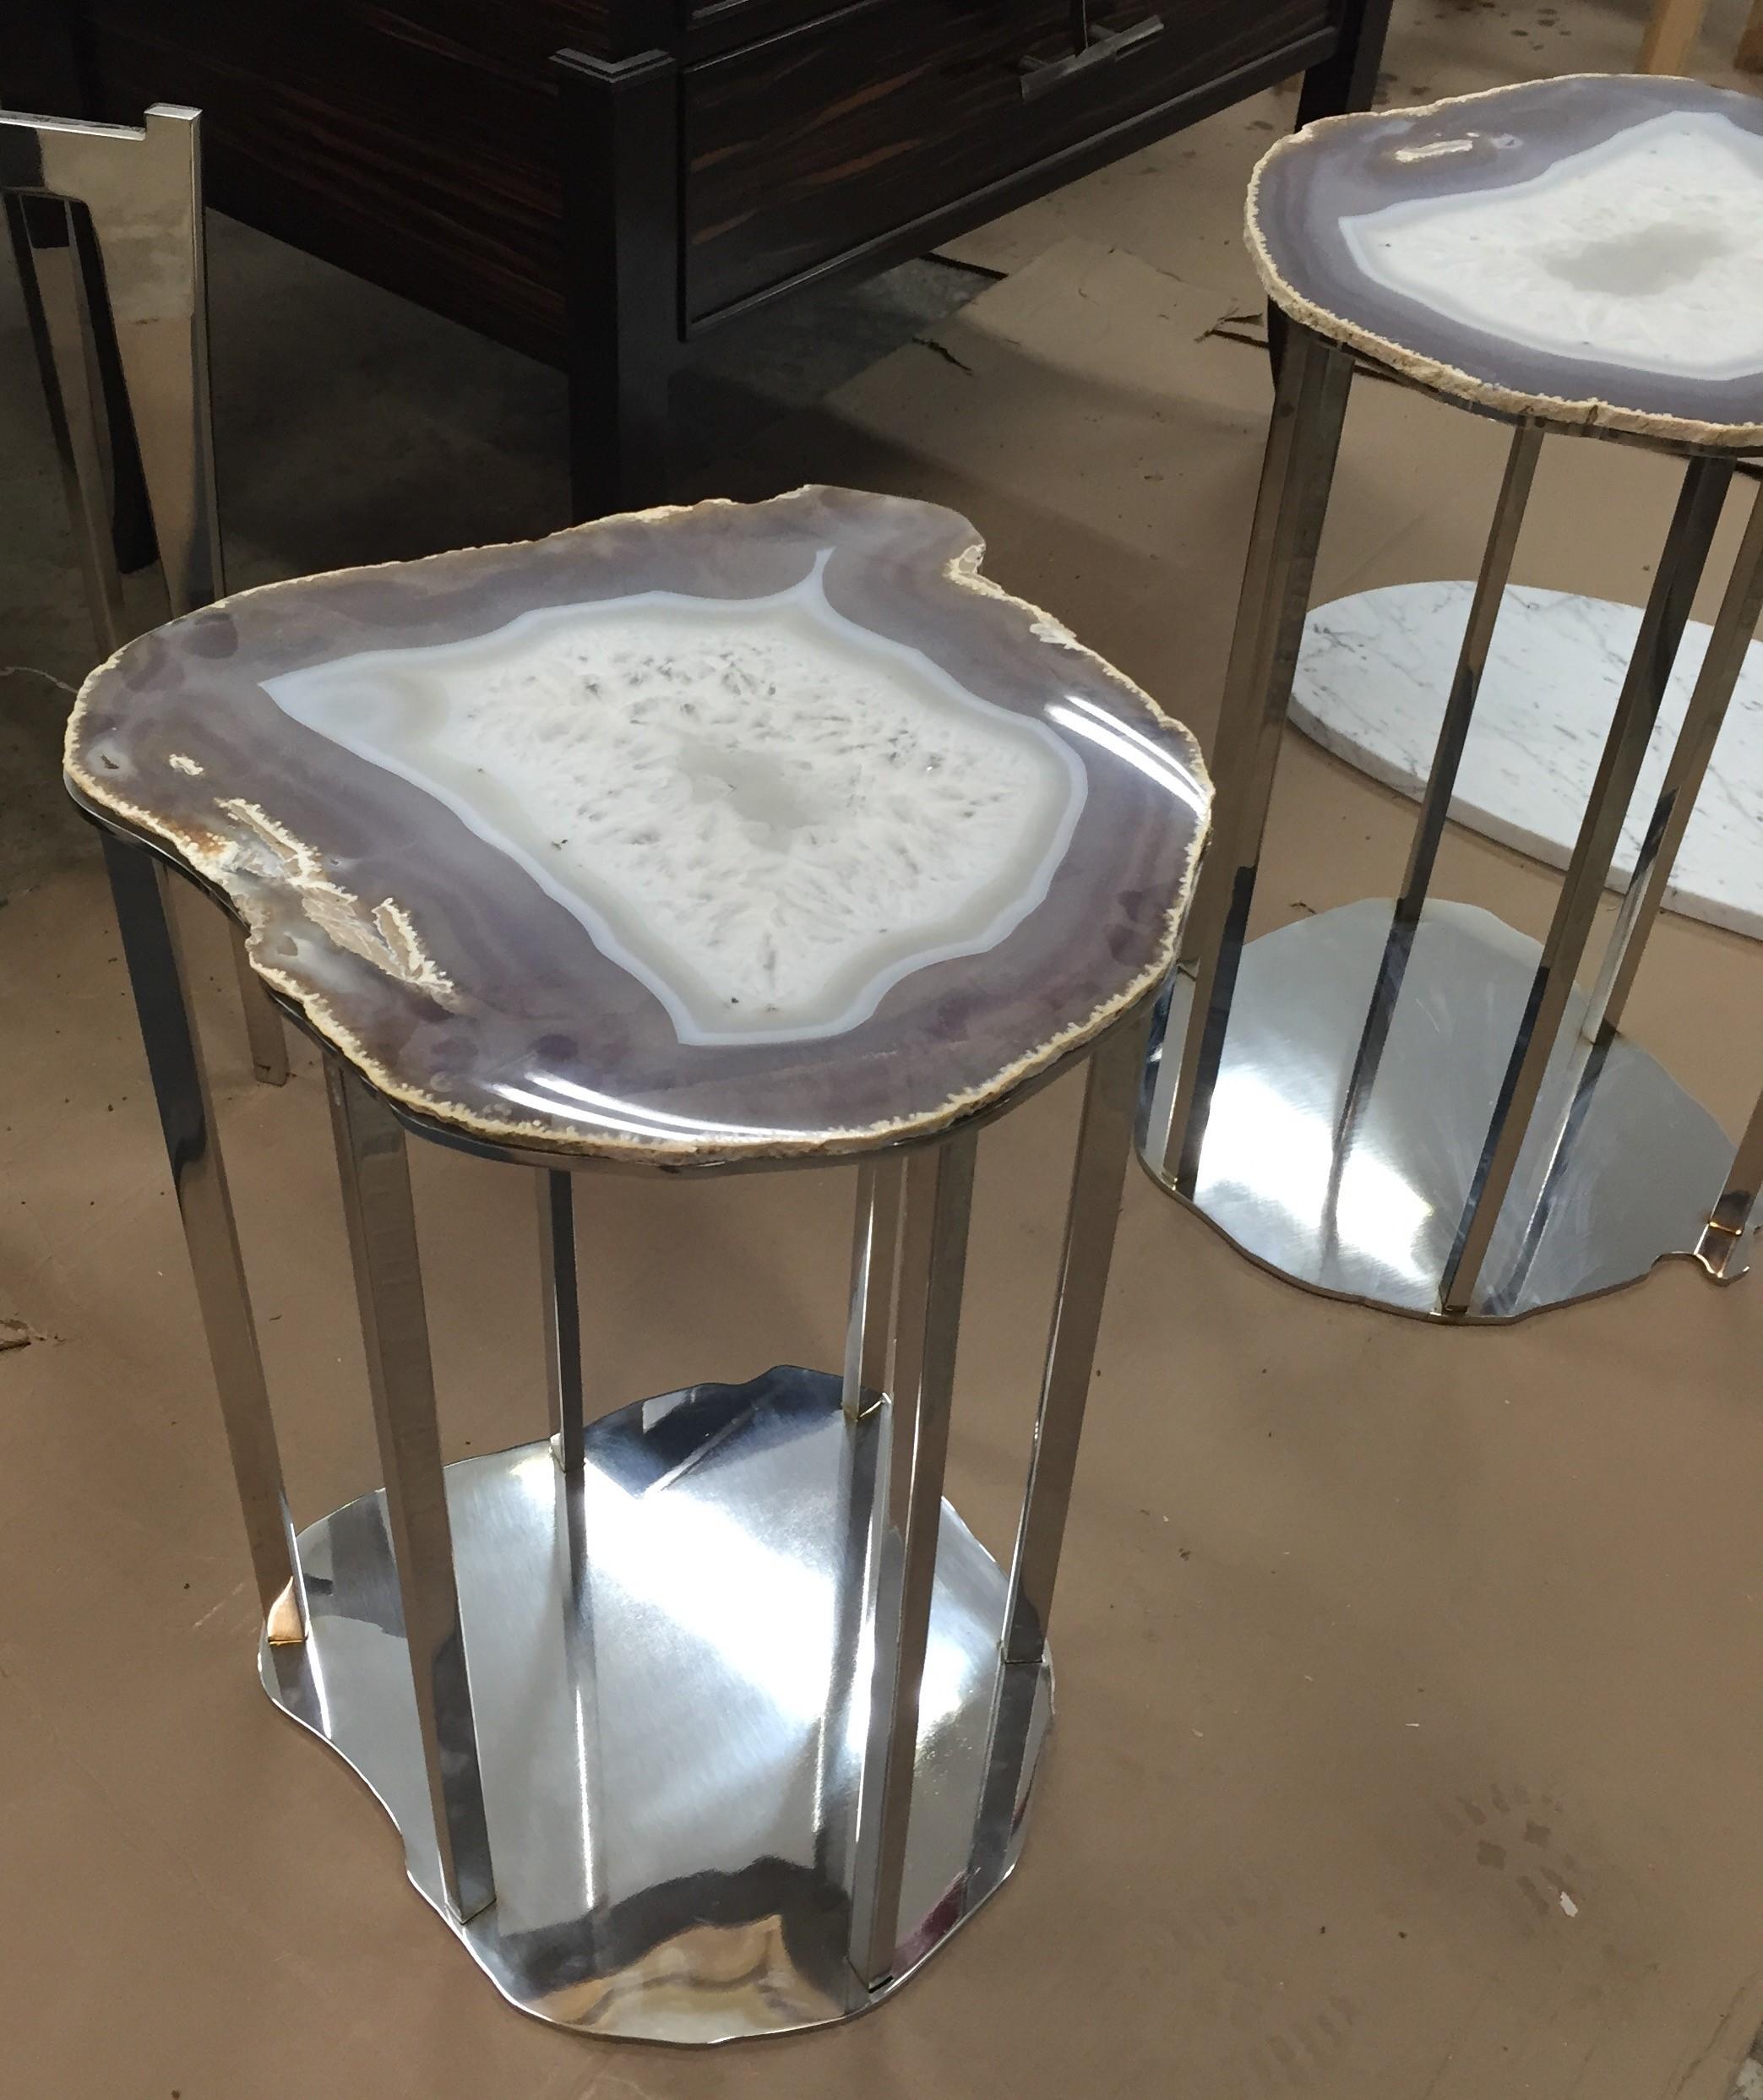 No longer in stock. Custom orders only.
Stainless steel amethyst stone side table
Other semi precious stone tops available.
Customizable with different metals including bronze, stainless steel, and blackened steel.